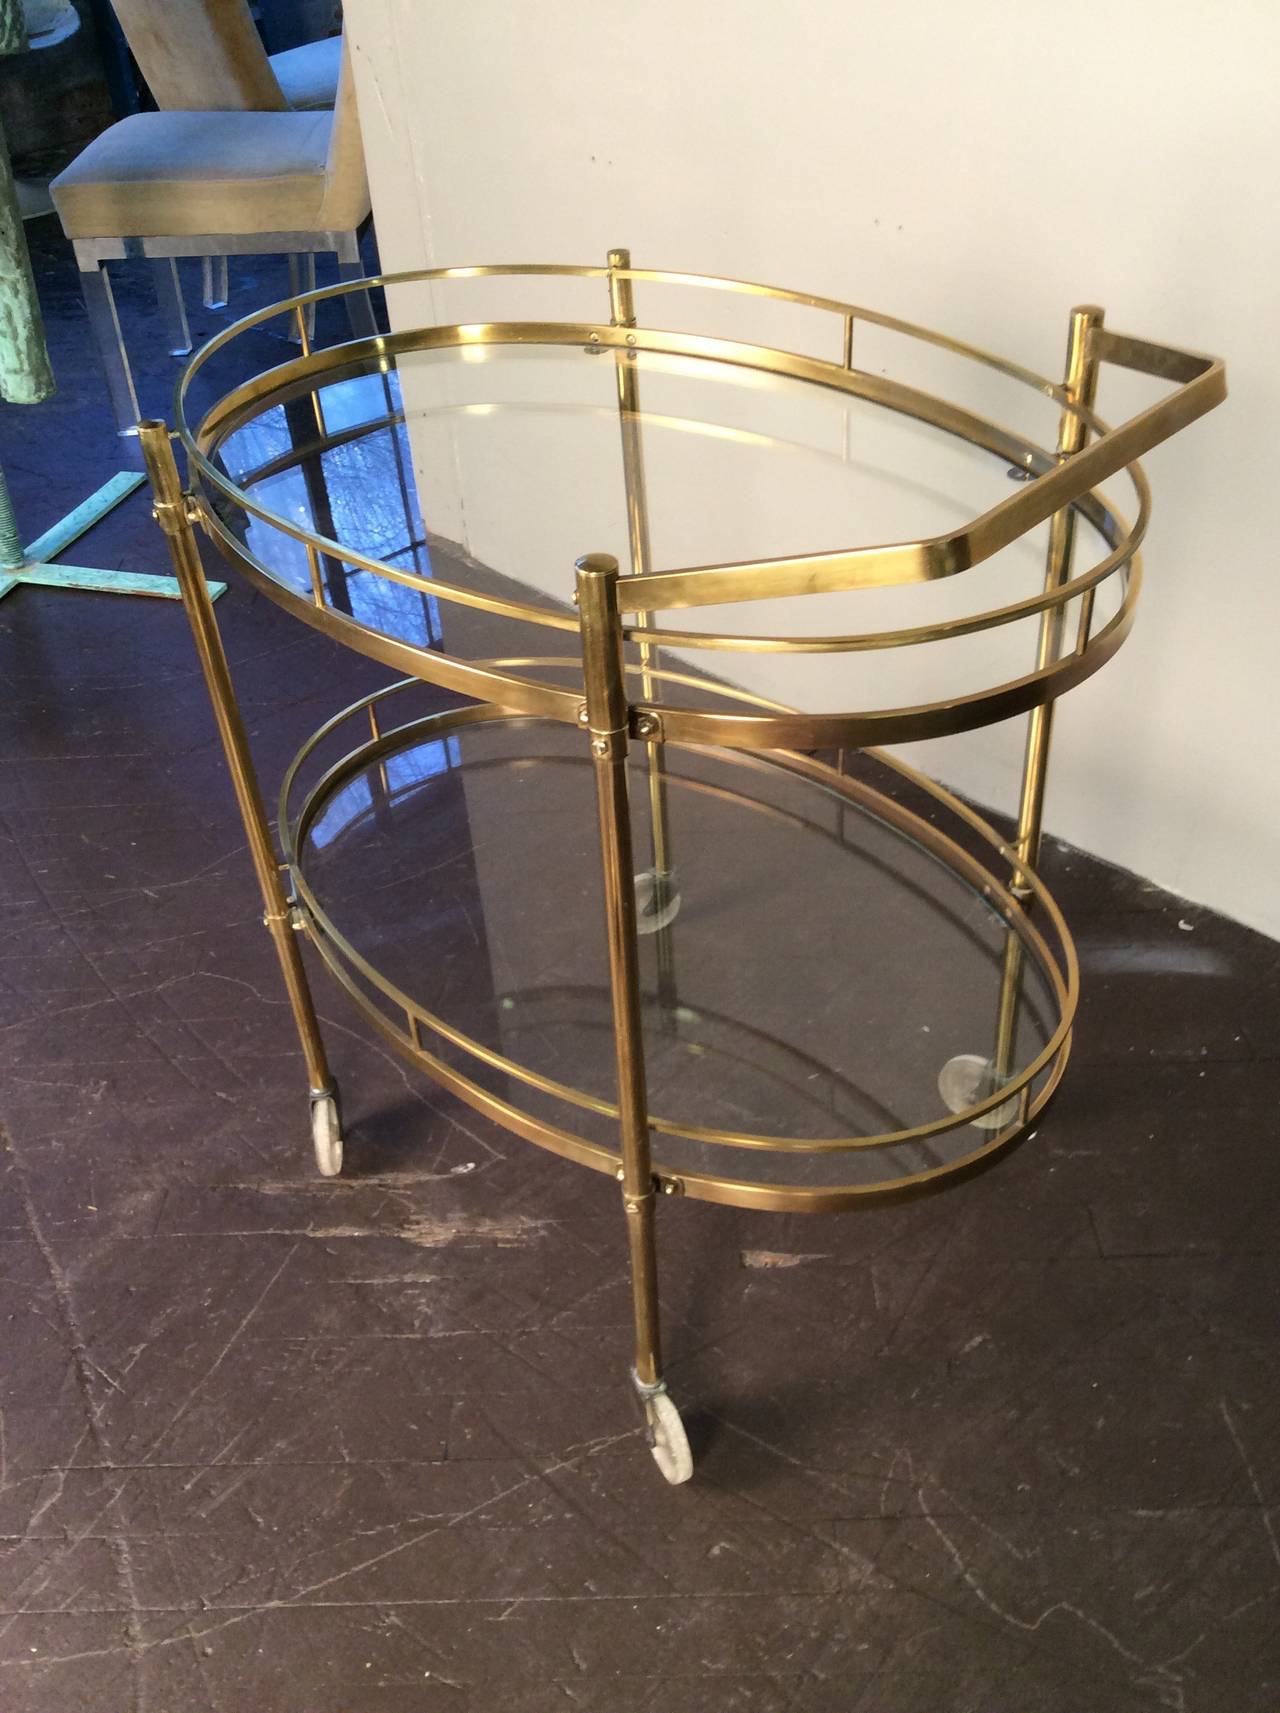 Hollywood Regency Patinated Solid Brass Bar Cart by Maxwell Phillips, New York City, circa 1960